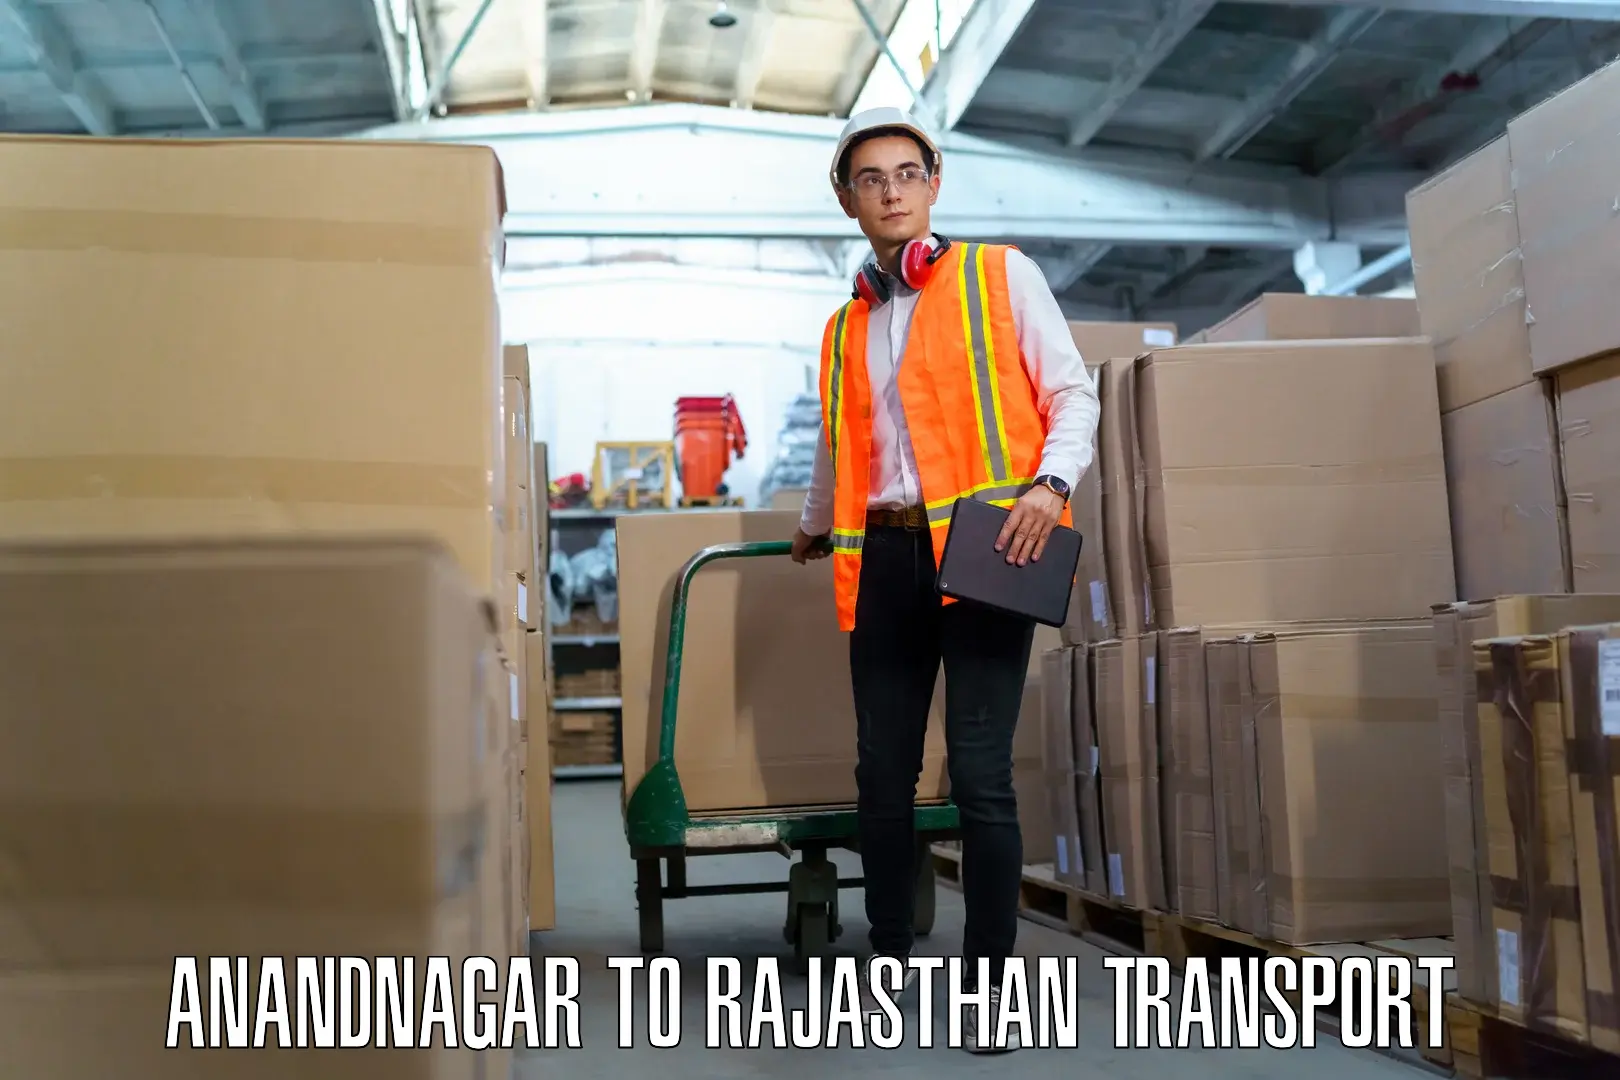 Luggage transport services in Anandnagar to Jaipur